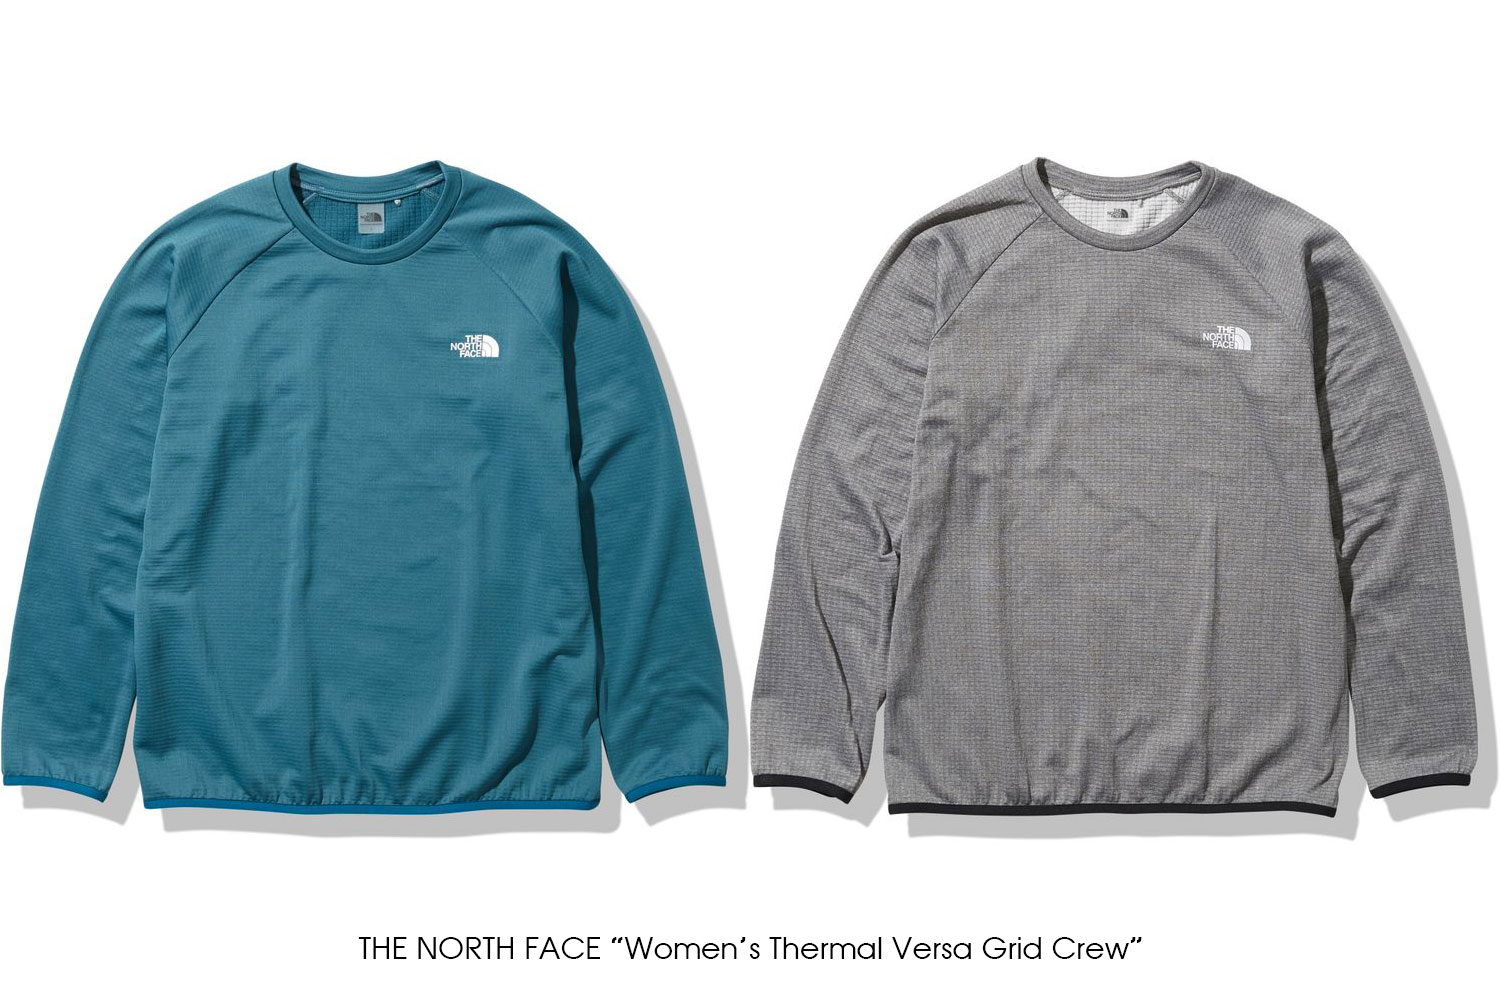 THE NORTH FACE "Thermal Versa Grid Crew"